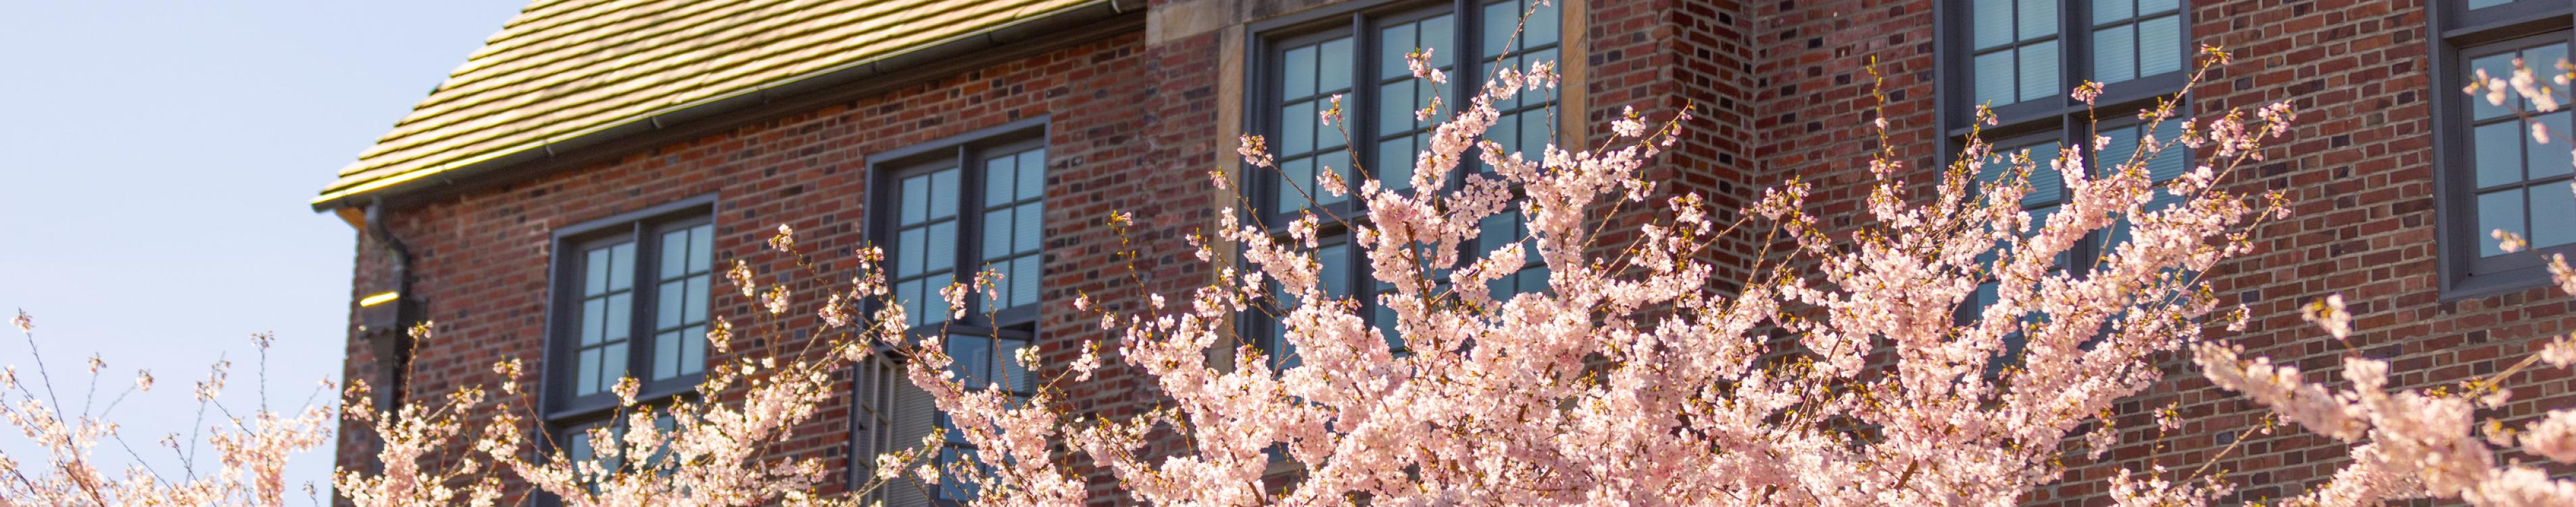 Cherry trees bloom with a brick building and windows peeking out in the background. 